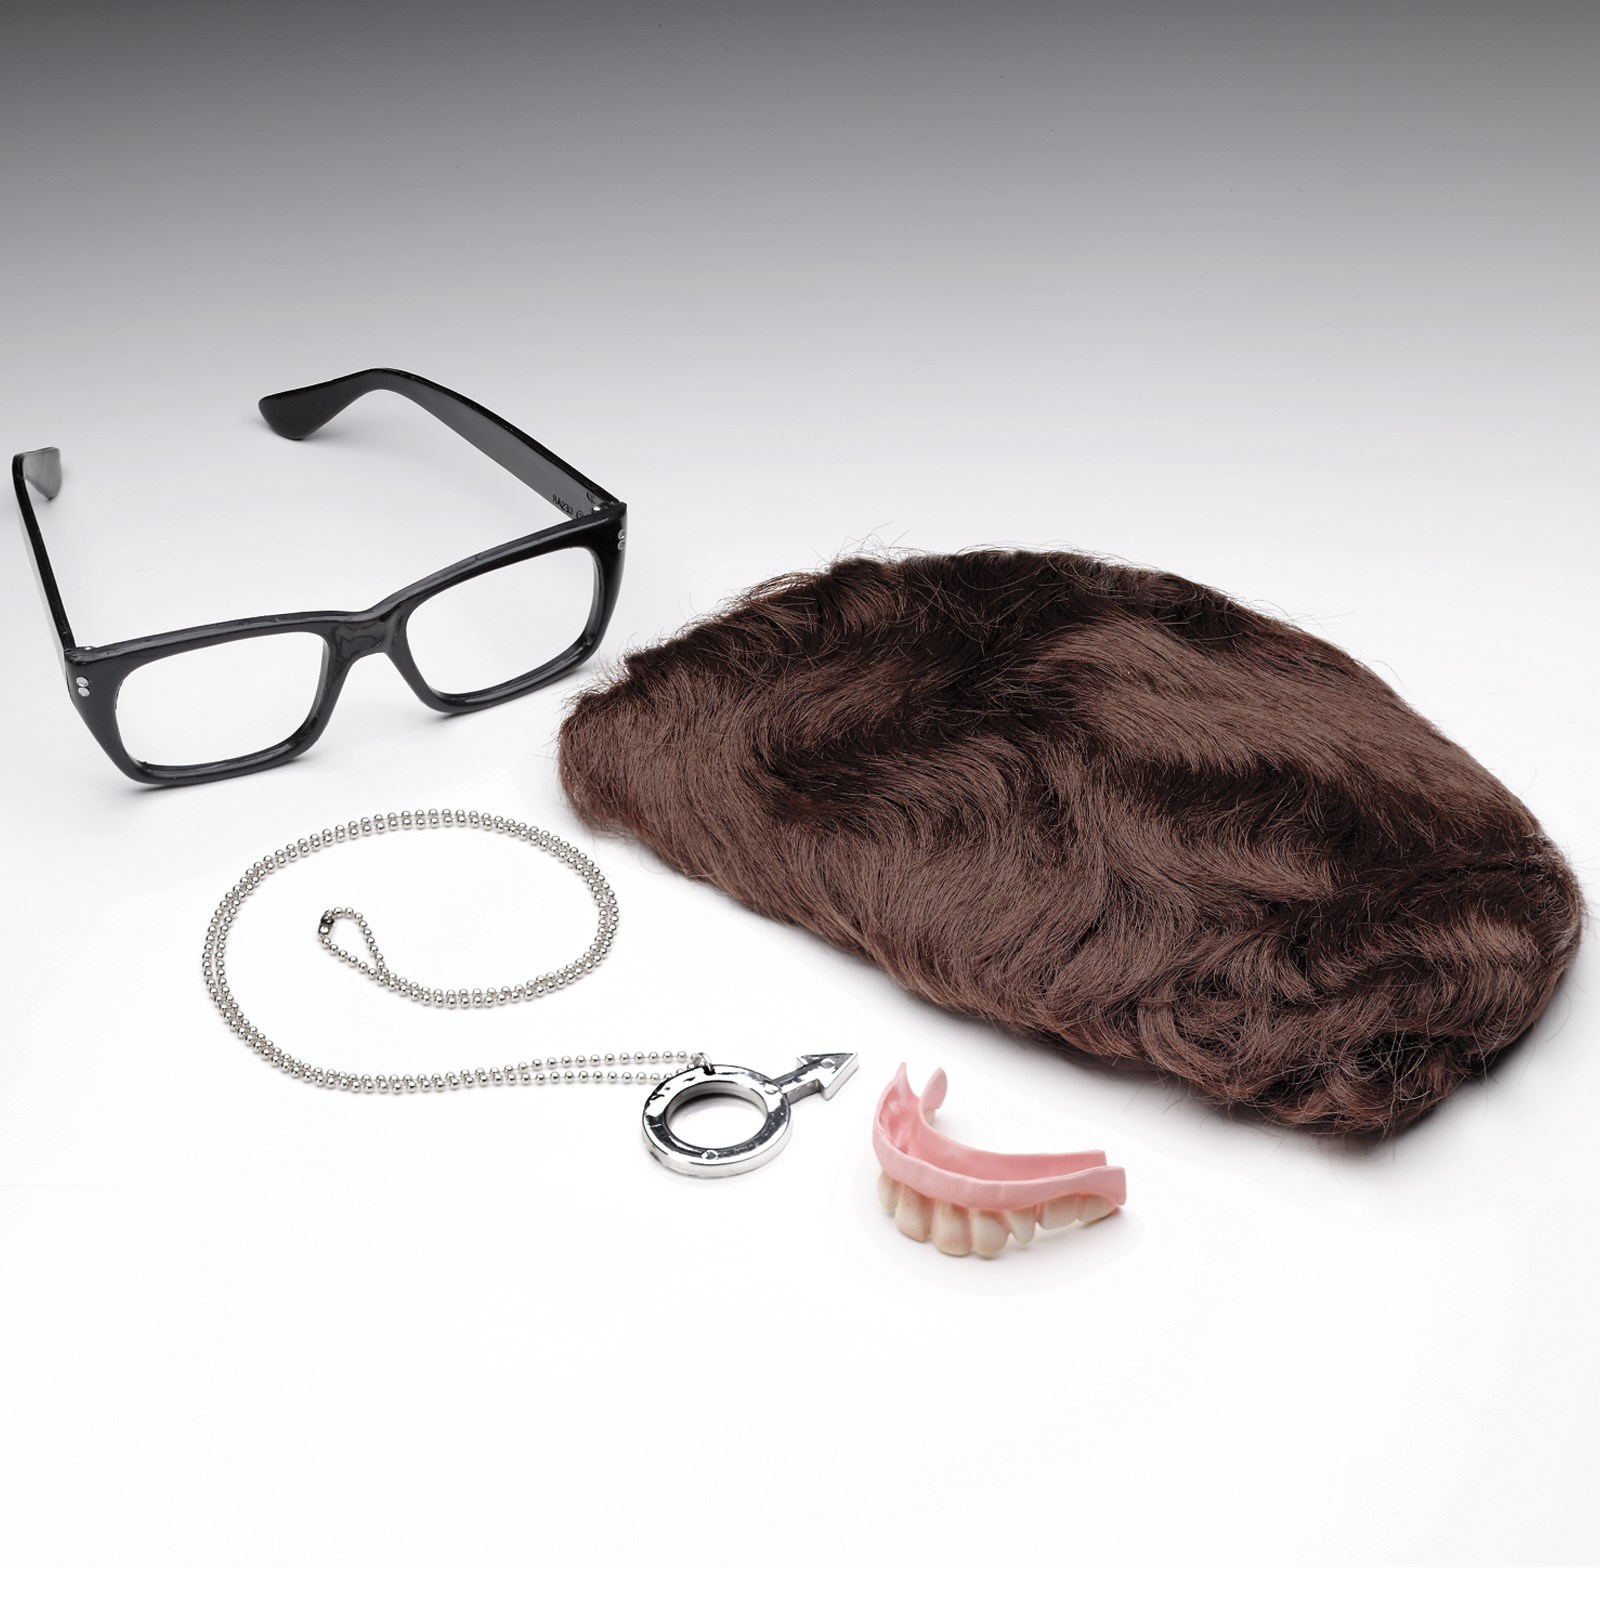 Austin Powers Deluxe Accessory Kit Adult